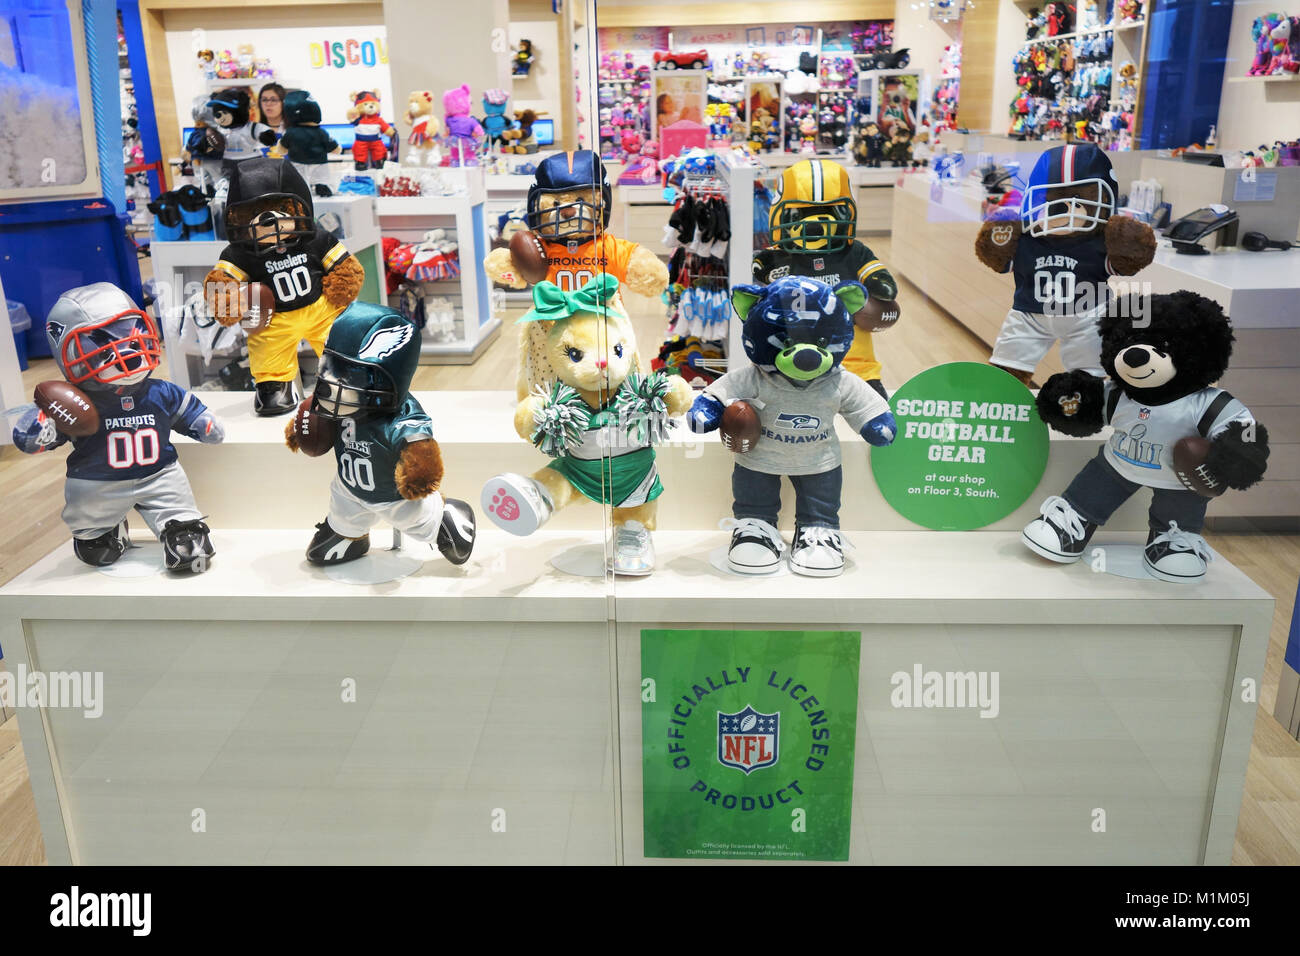 Minneapolis, Minnesota, USA. 31st January, 2018. A display of teddy bears in football uniforms in honor of the 2018 Super Bowl, at the Build a Bear Workshop in the Mall of America in Minneapolis, Minnesota, USA. Copyright: Gina Kelly/Alamy Live News Stock Photo